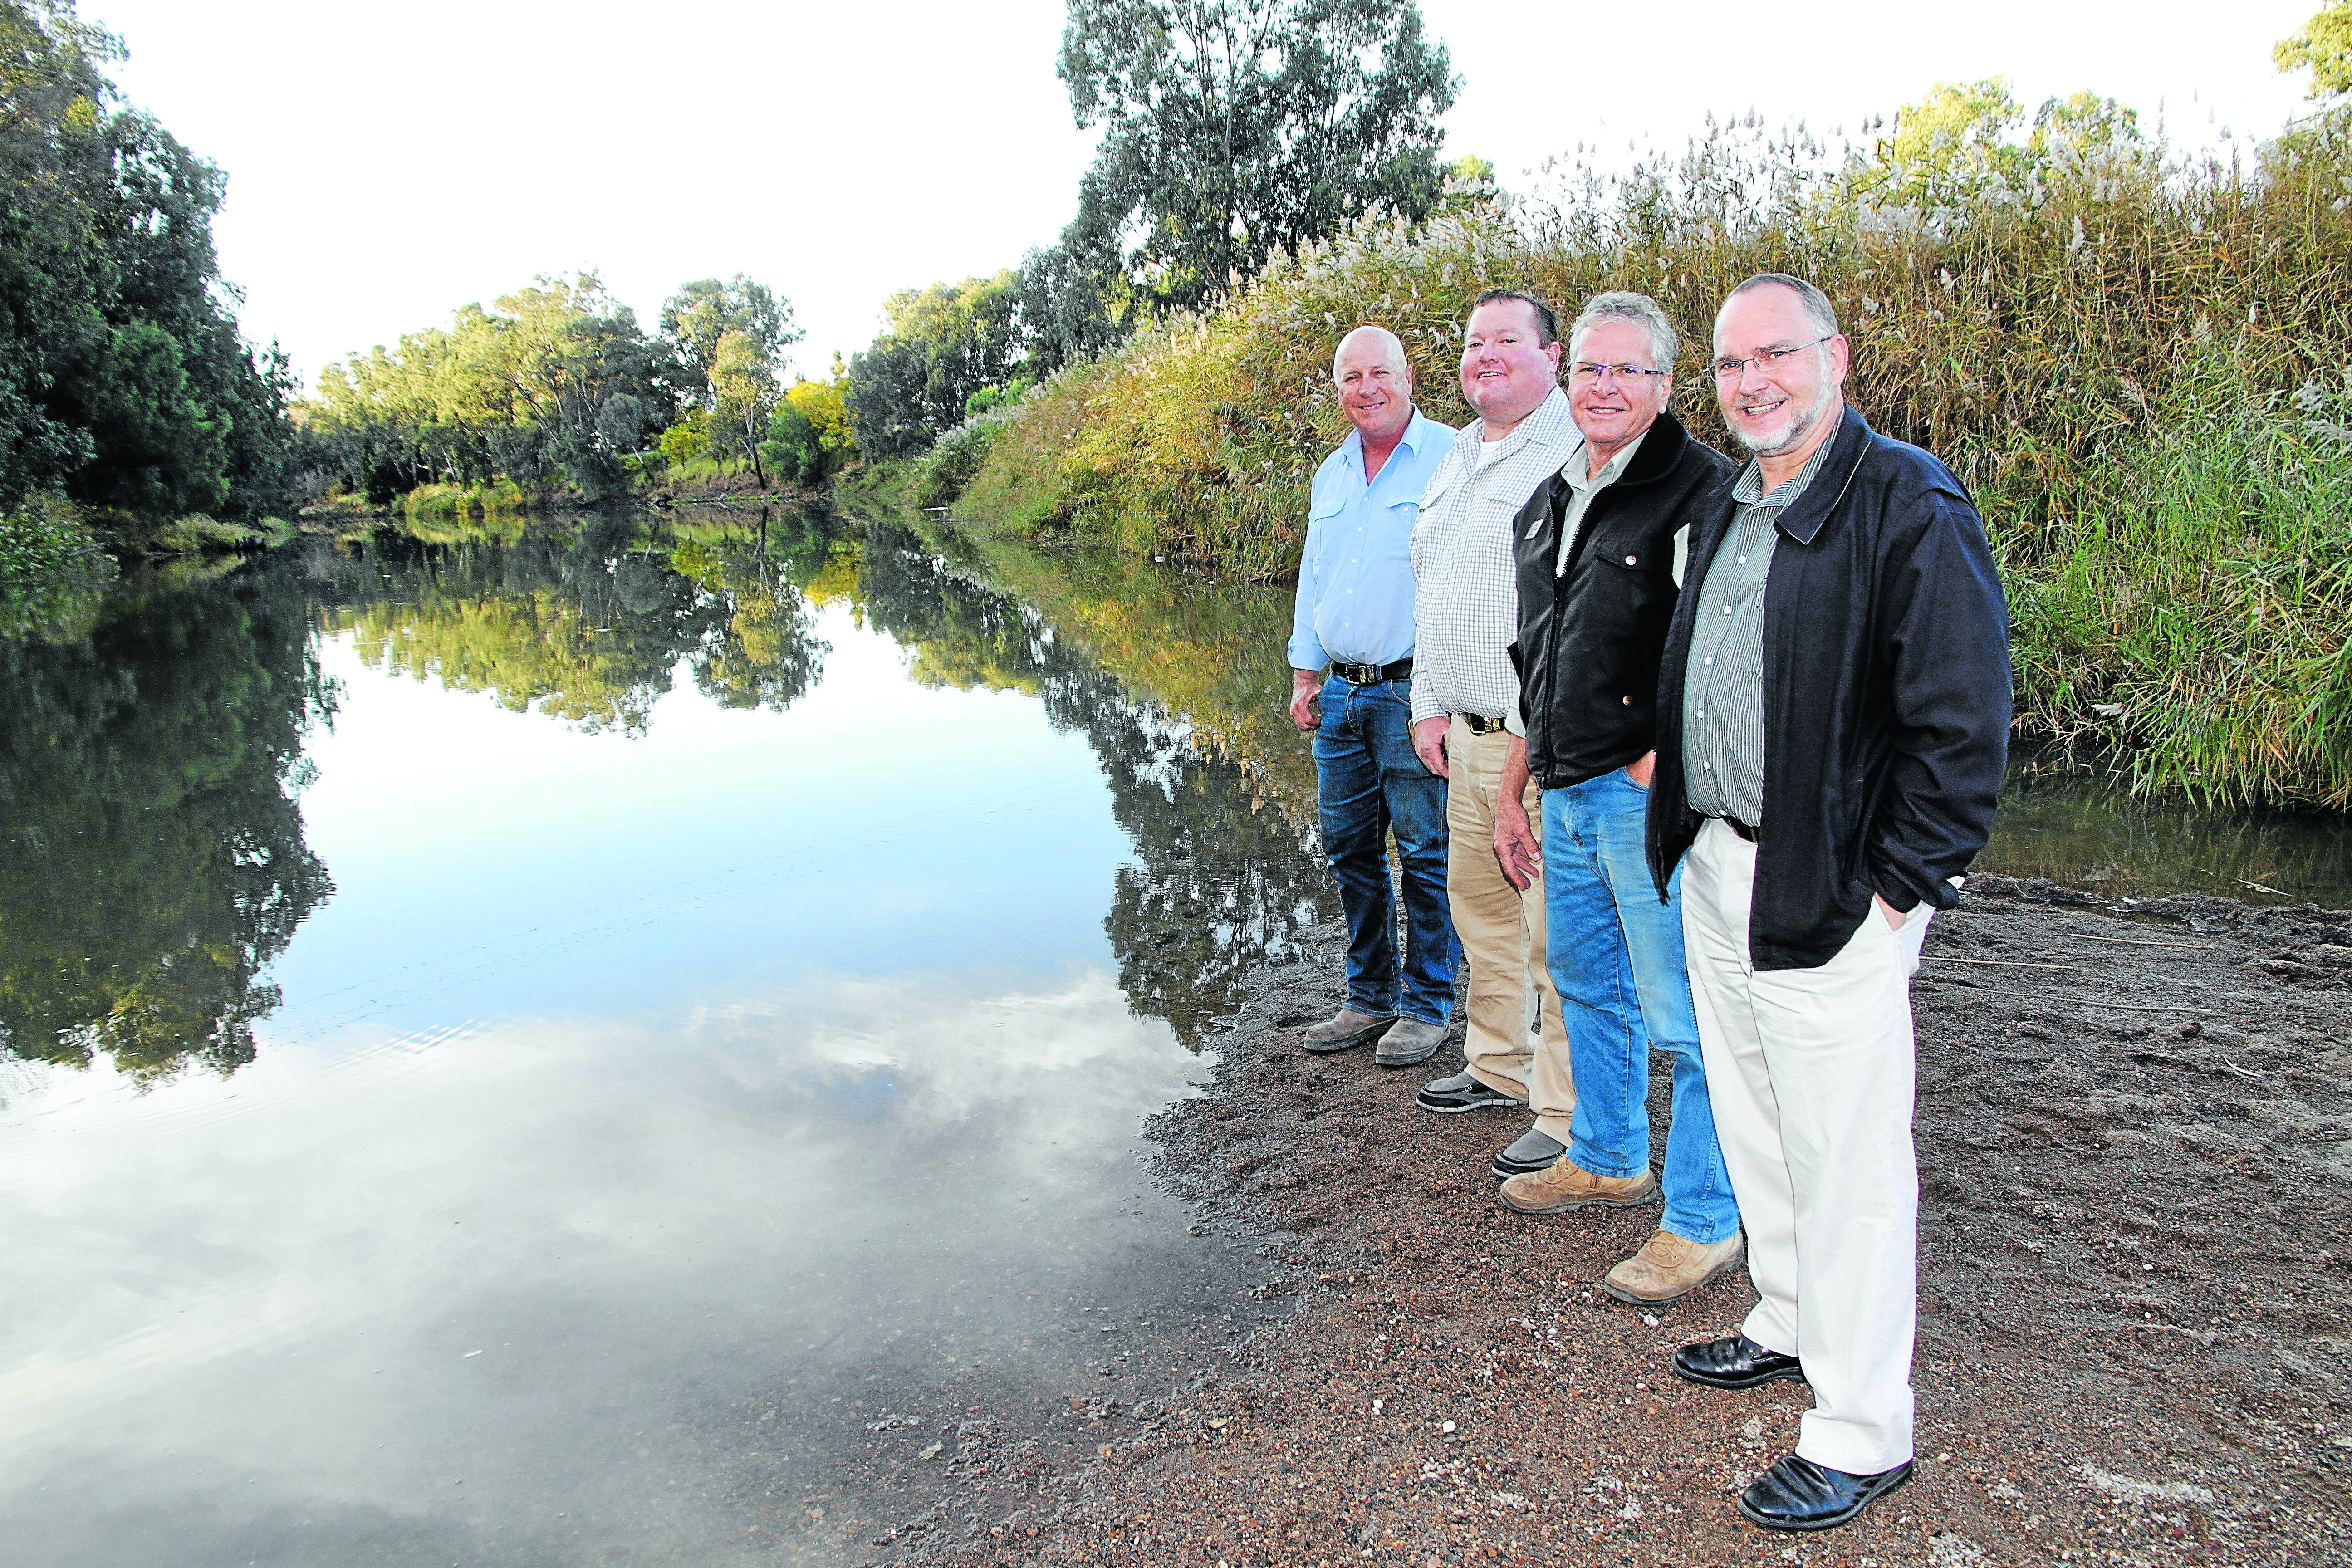 Creek weir study is proposed